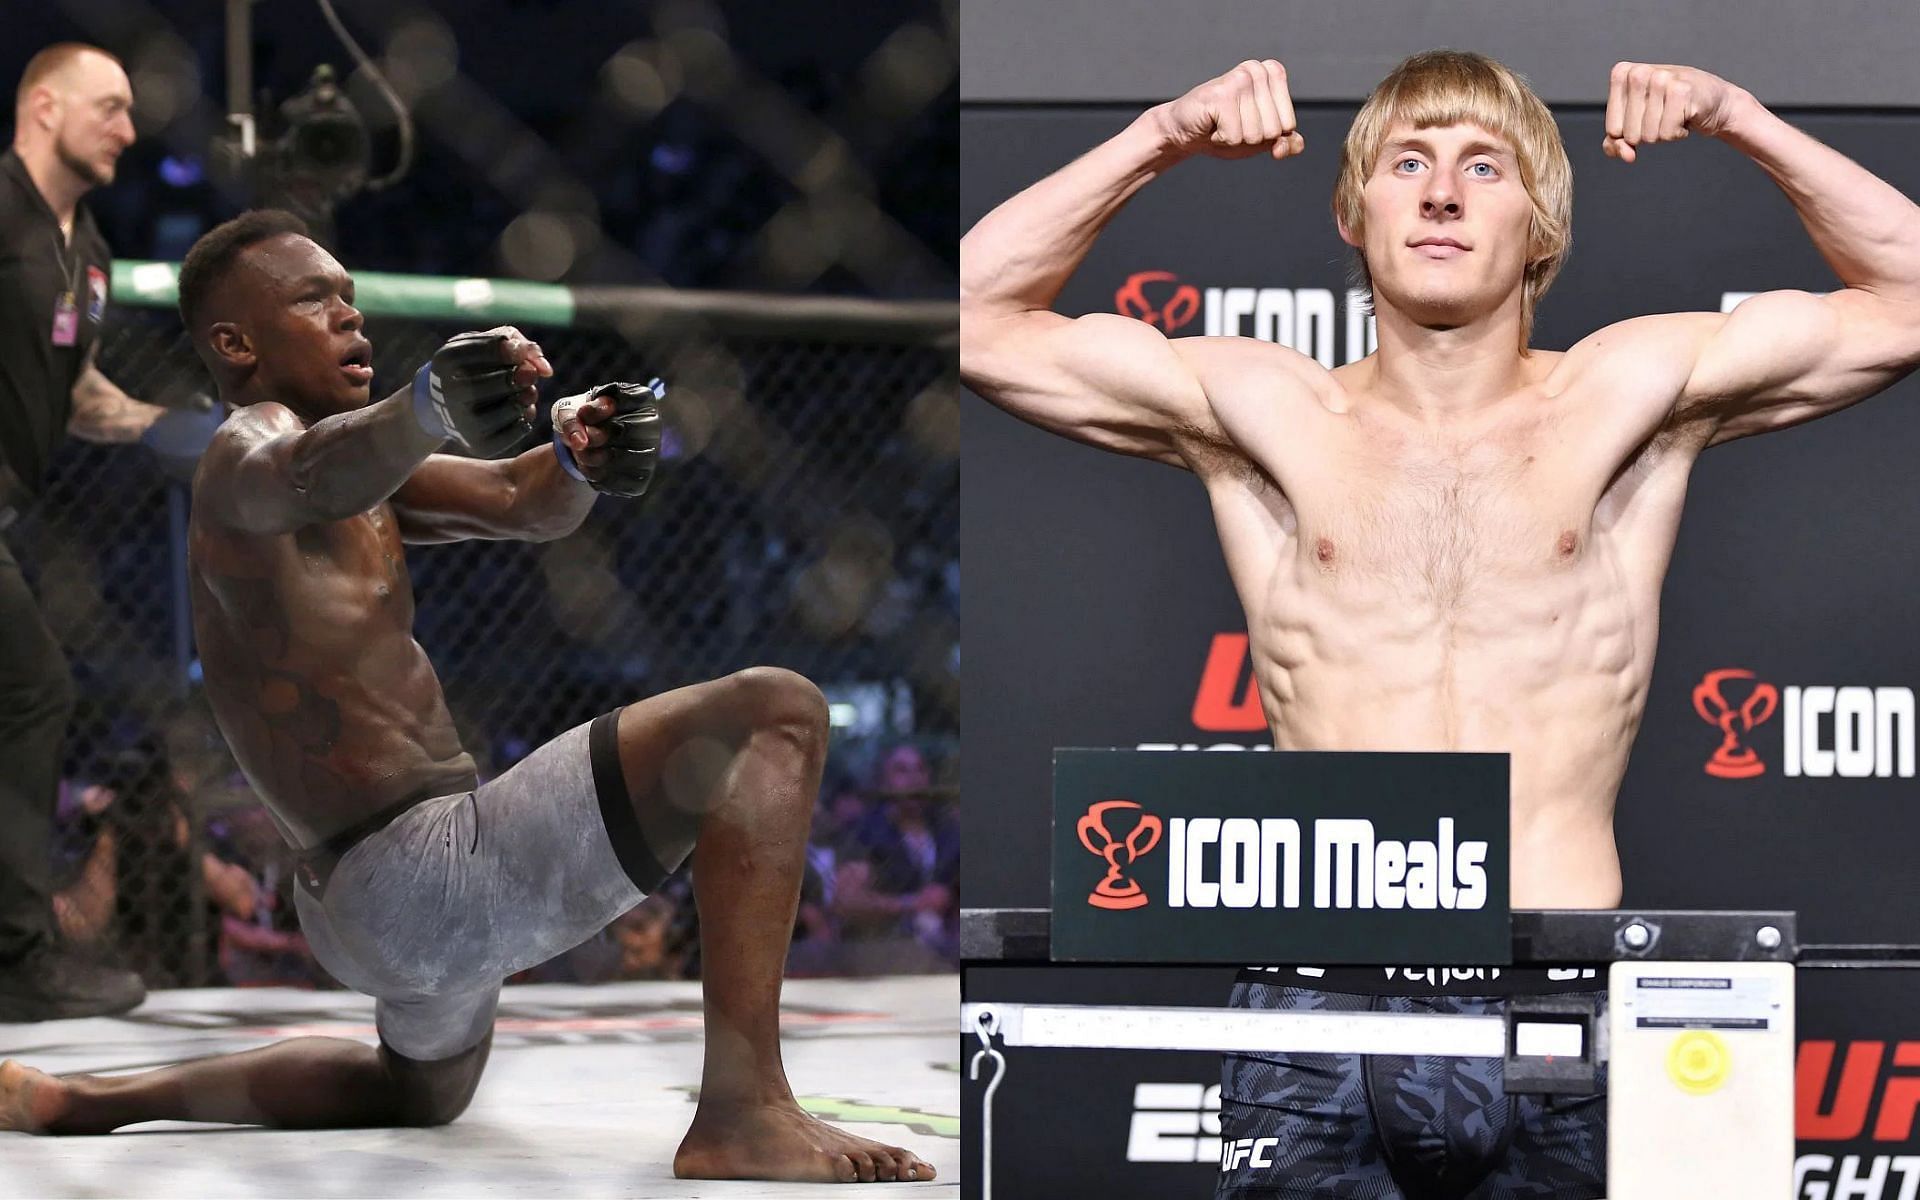 Israel Adesanya (Left) and Paddy Pimblett (Right) (Images courtesy of Getty)